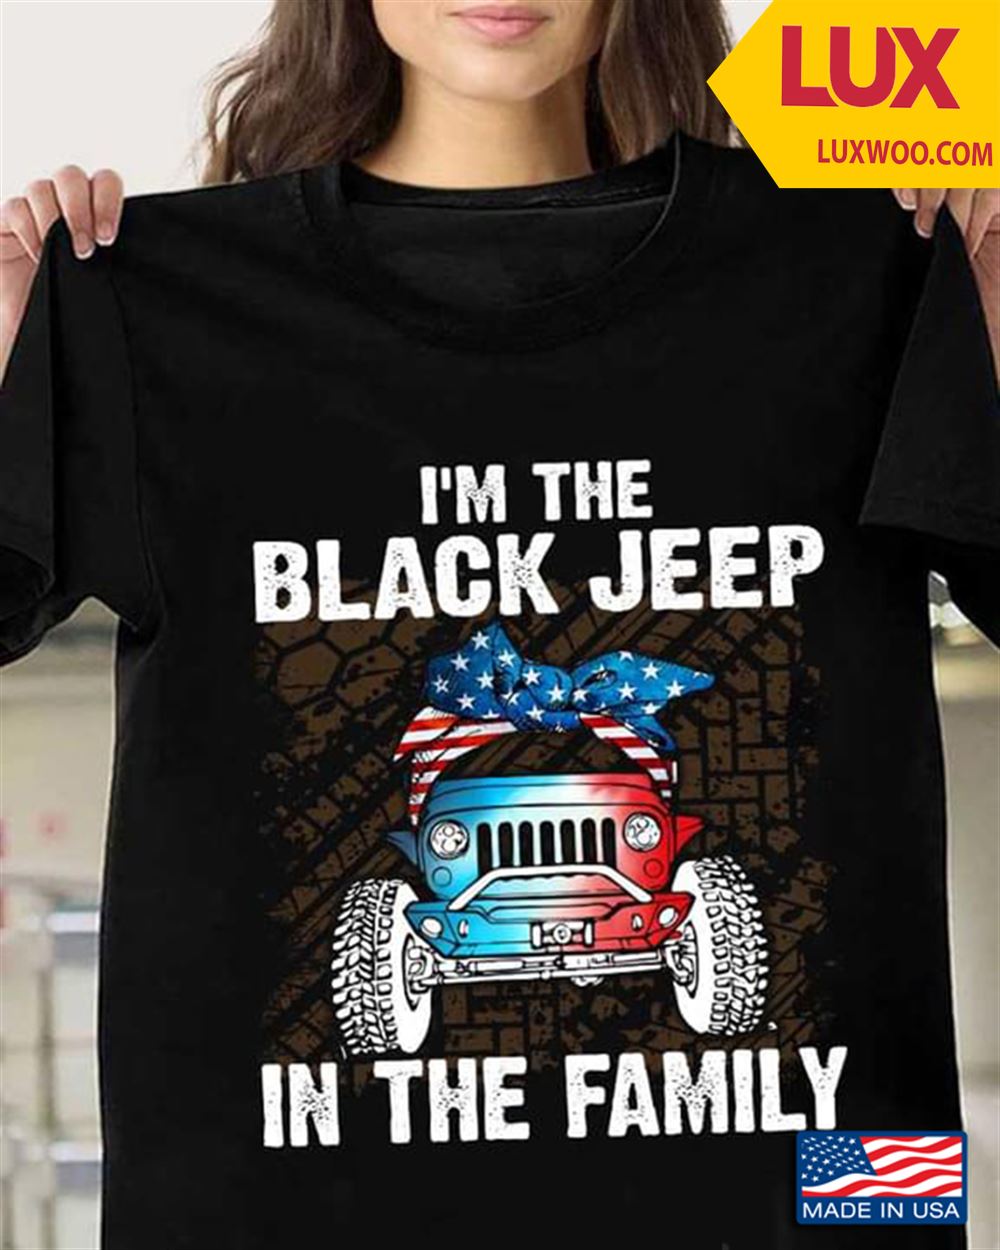 Im The Black Jeep In The Family For Jeep Lovers Shirt Size Up To 5xl